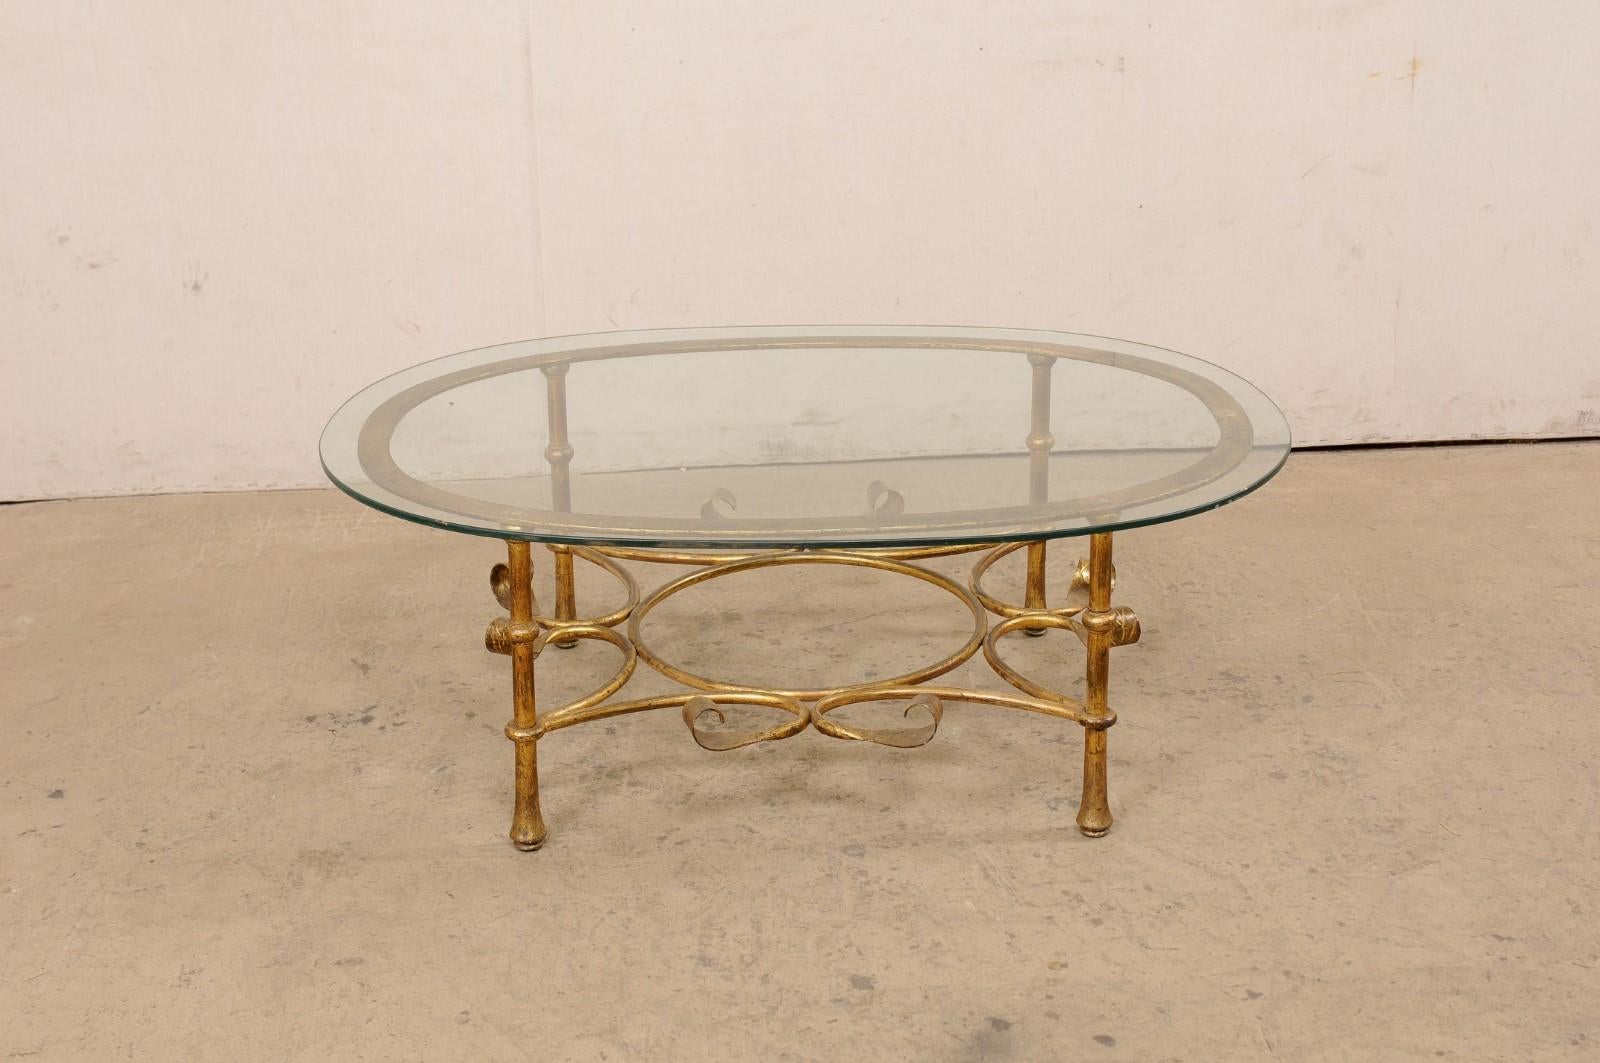 Spanish Oval Glass-Top Table with Iron Base (Gold Finish), Mid 20th C. 4